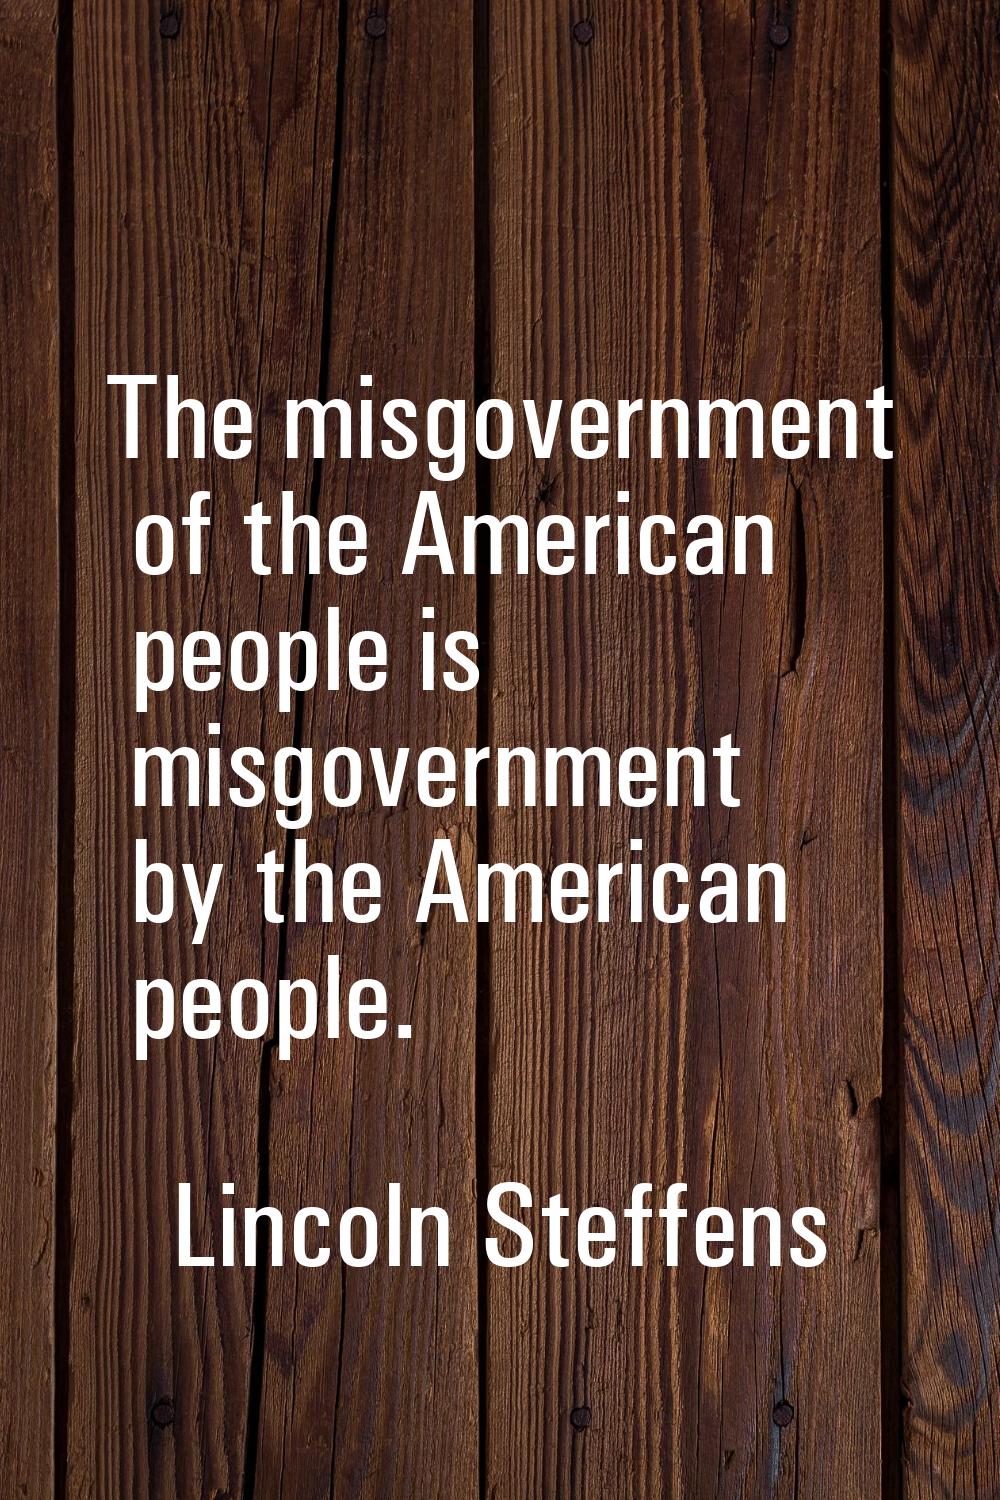 The misgovernment of the American people is misgovernment by the American people.